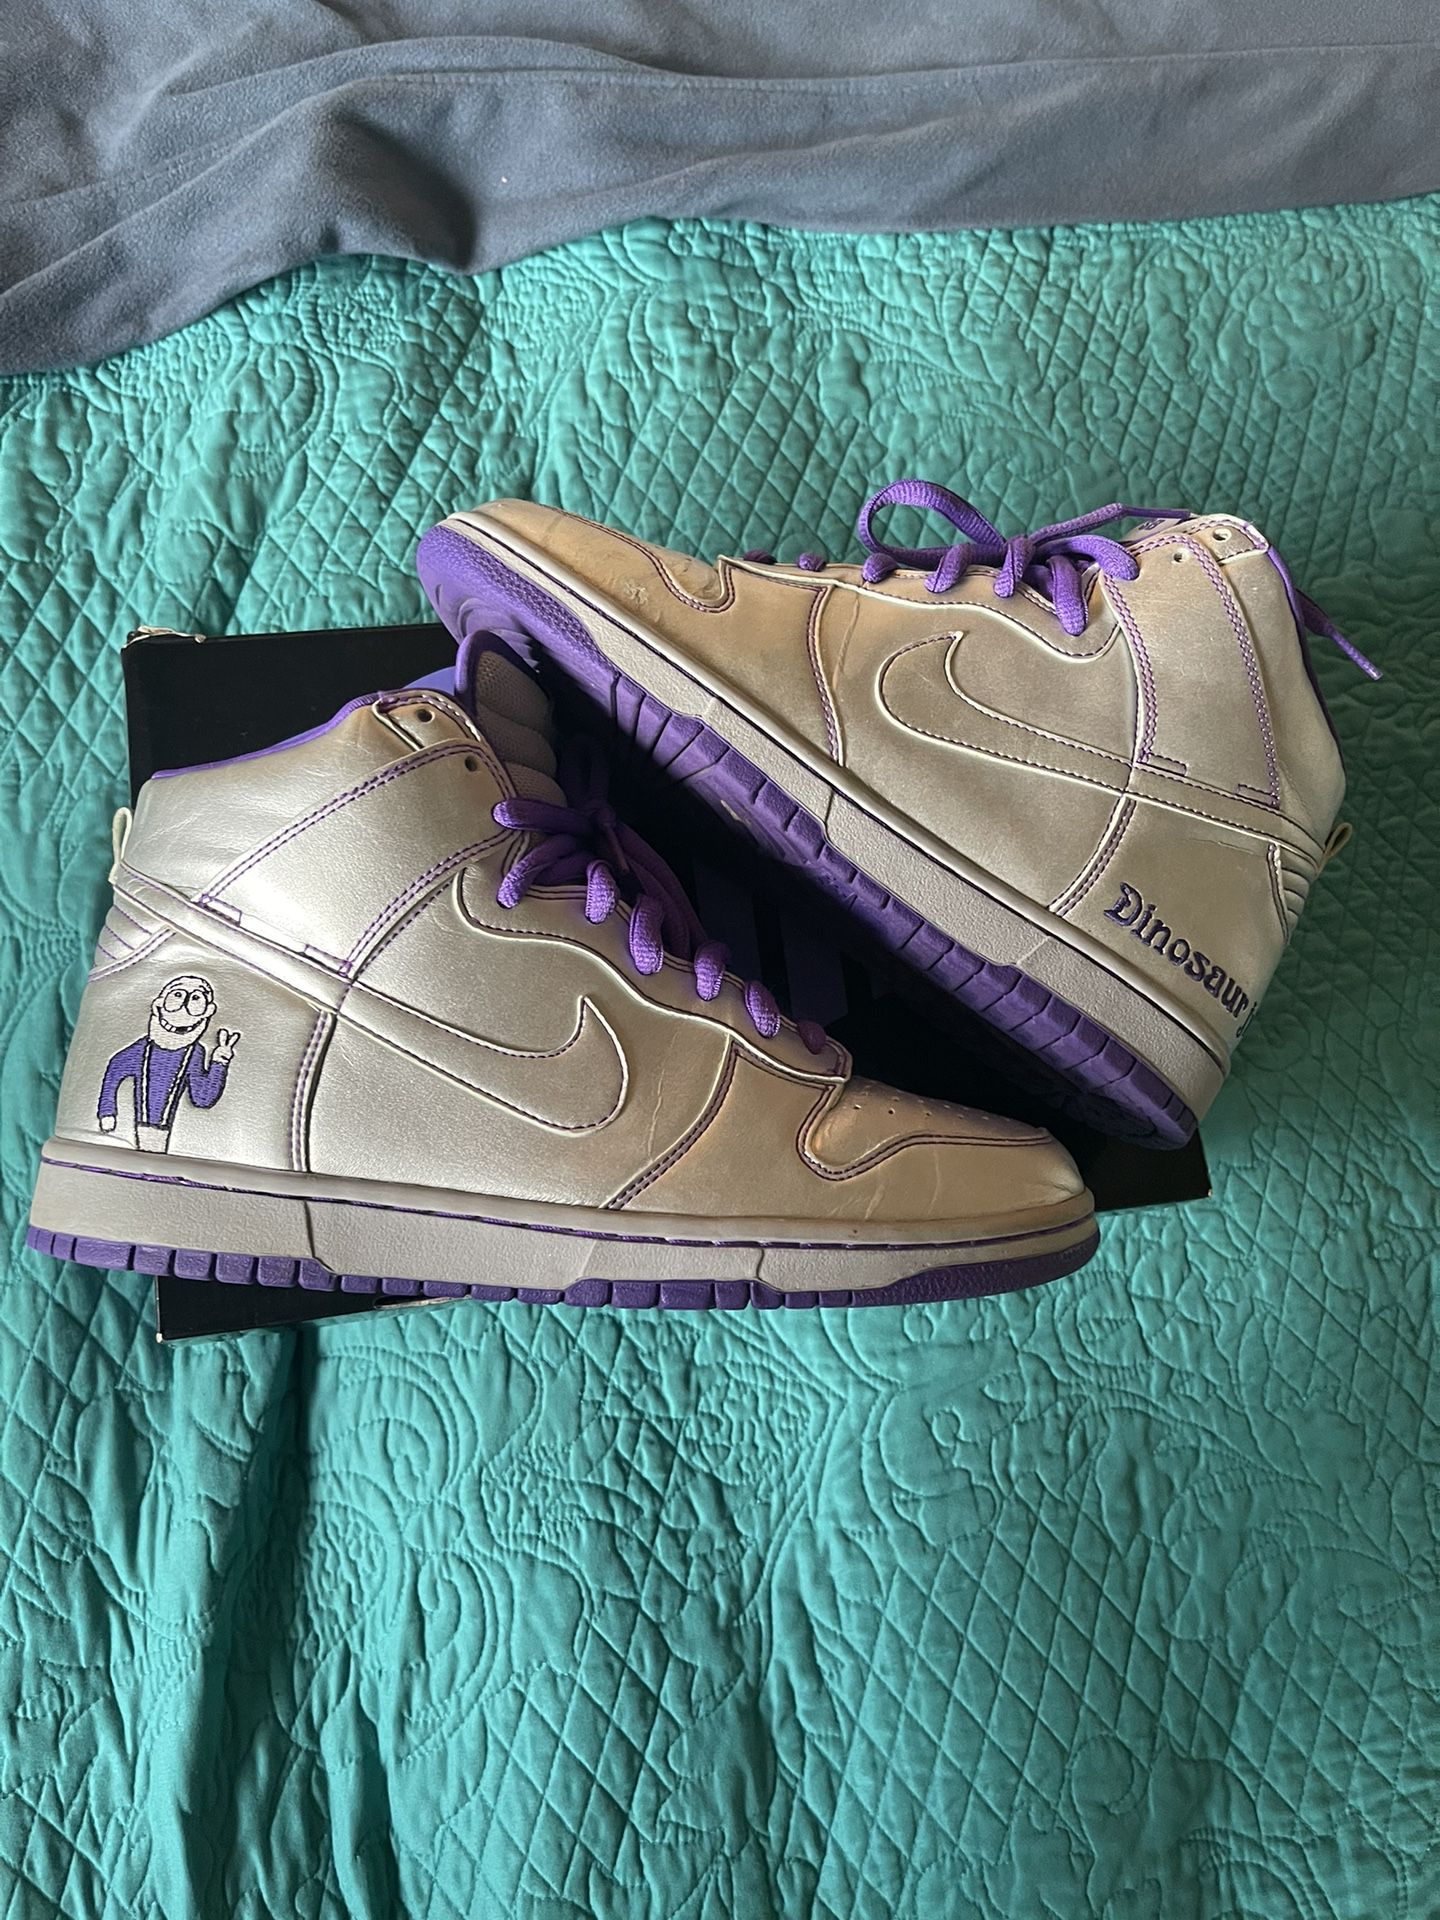 Nike Dunk SB High “Dinosaur JR” Size 10 for Sale in York, NY - OfferUp